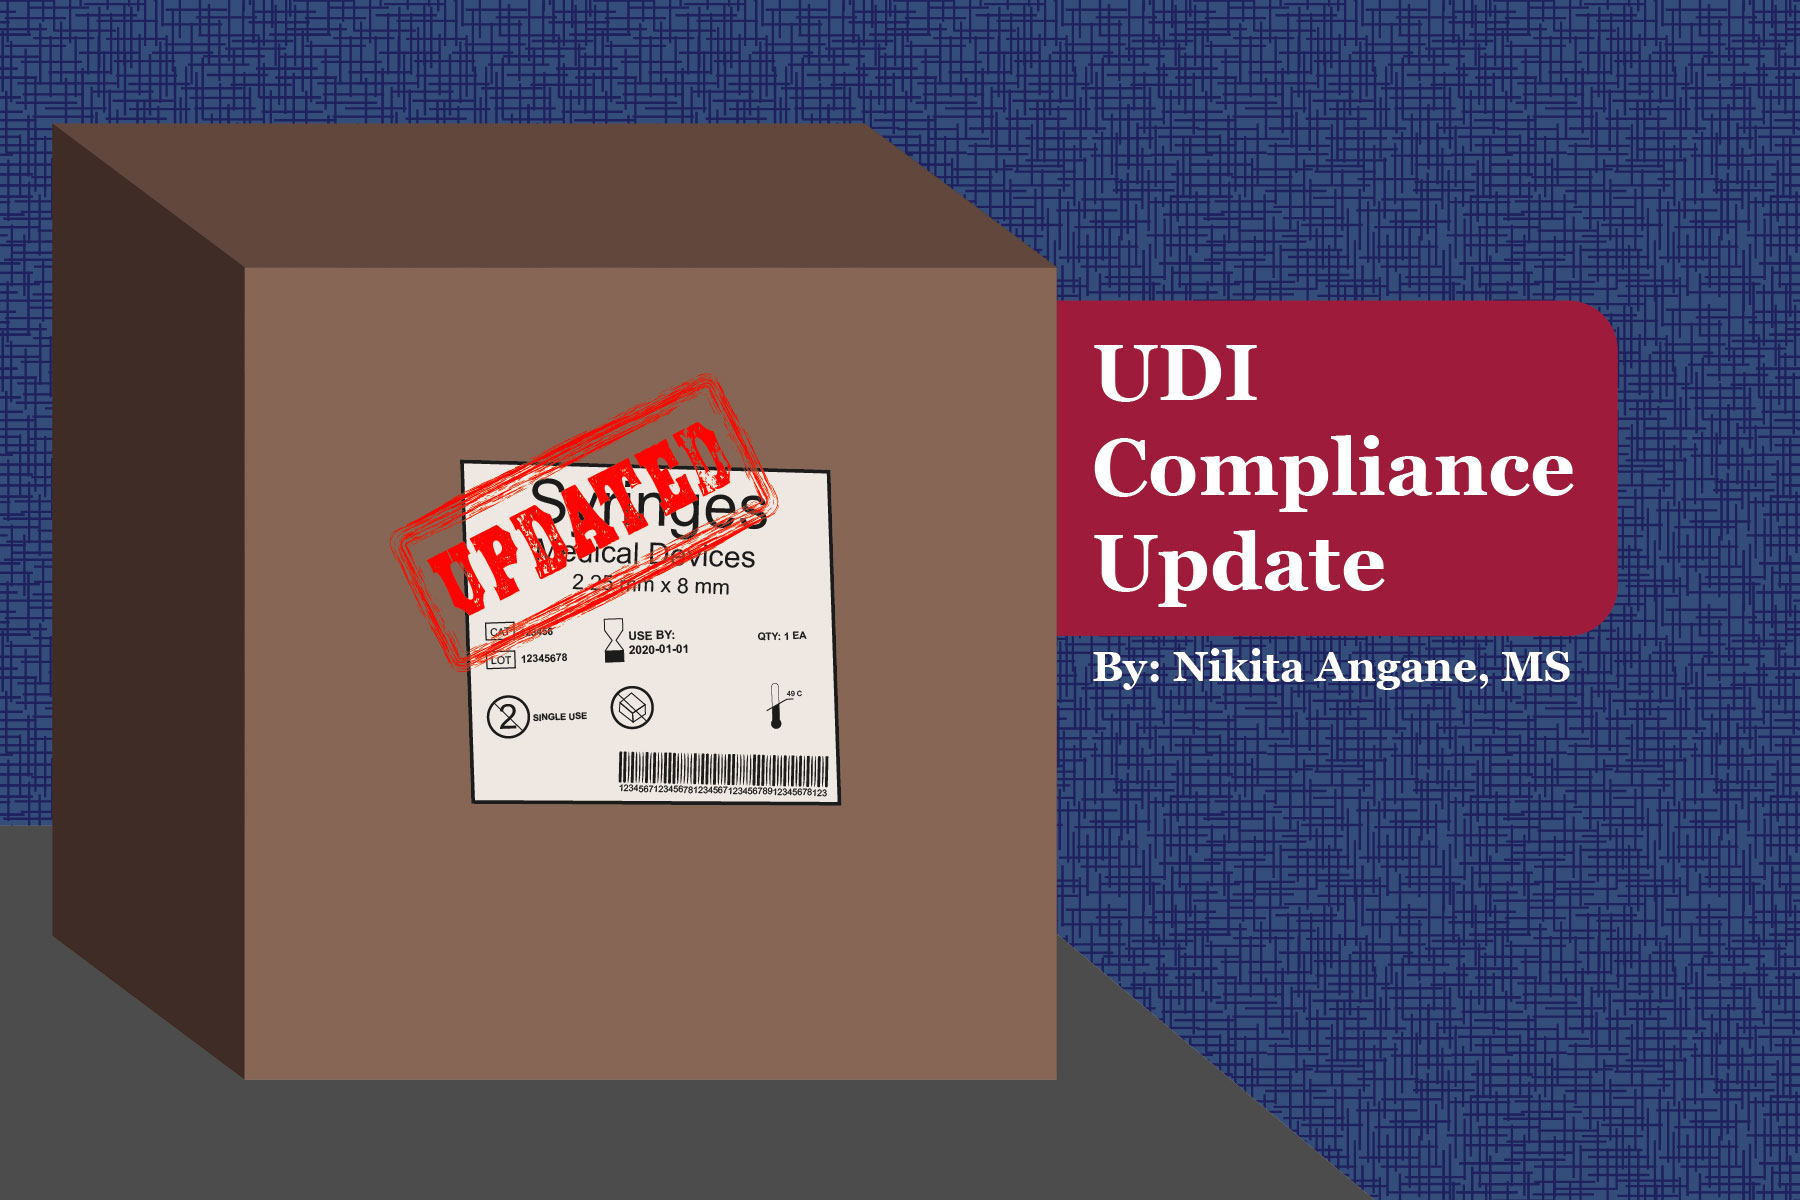 UDI label being updated due to new UDI Compliance Updates from FDA